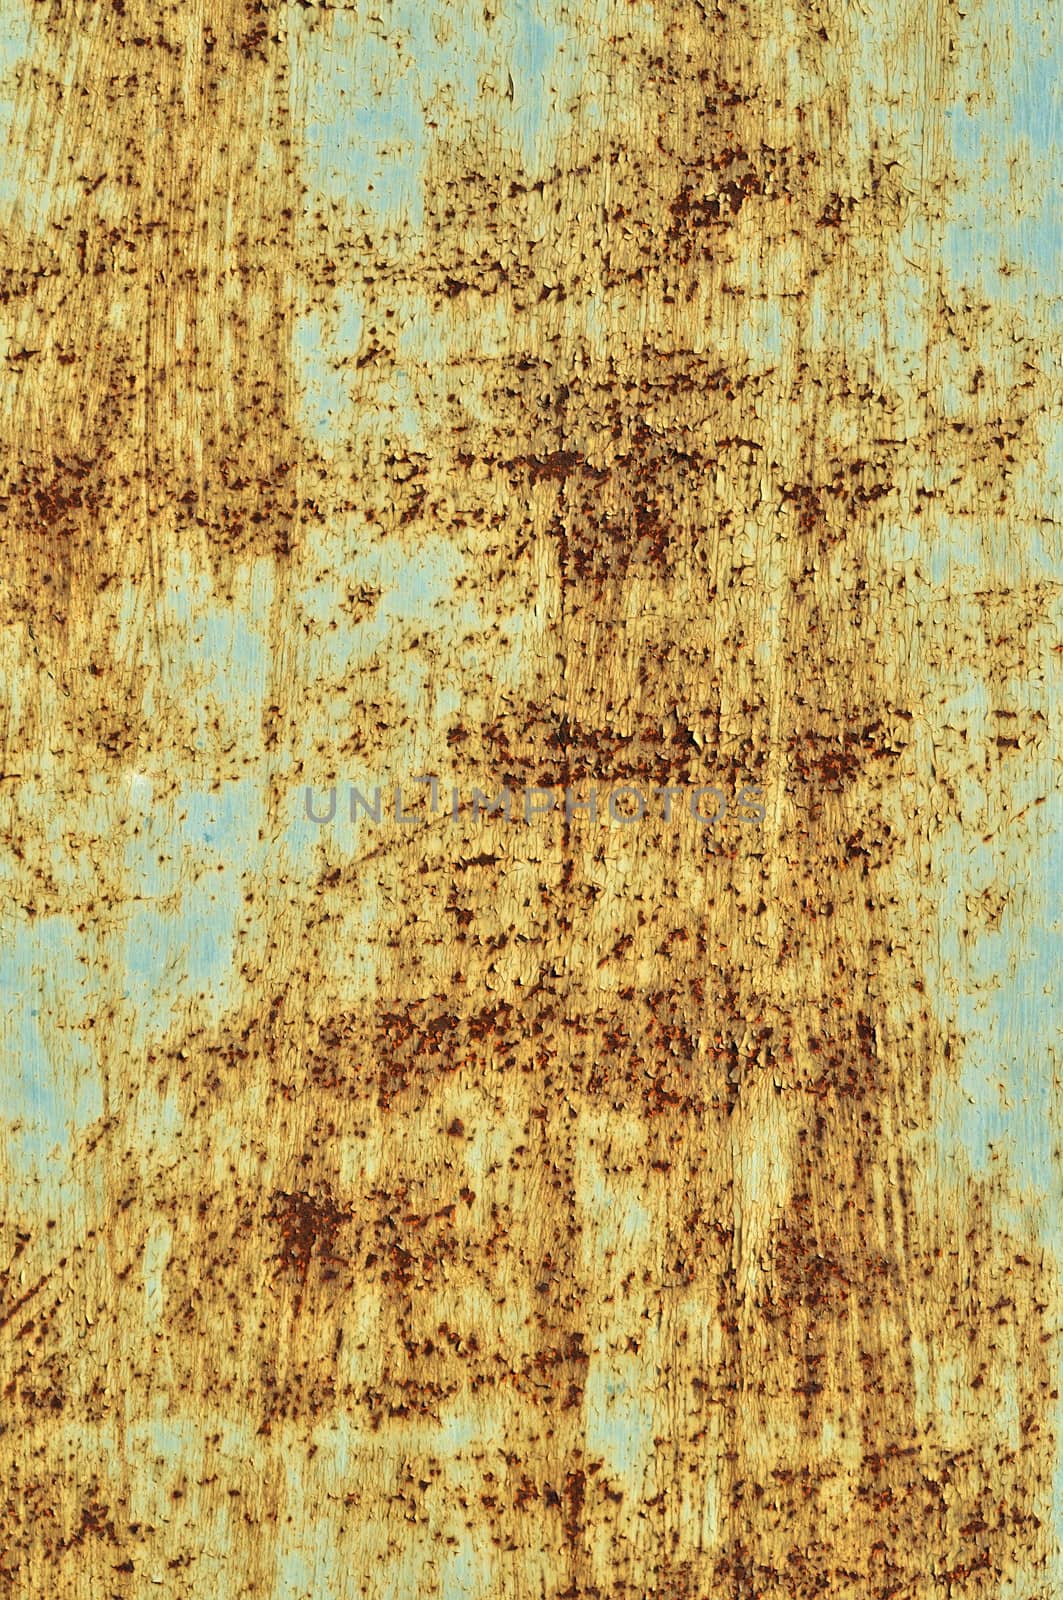 Rusty green colored metal background by wander